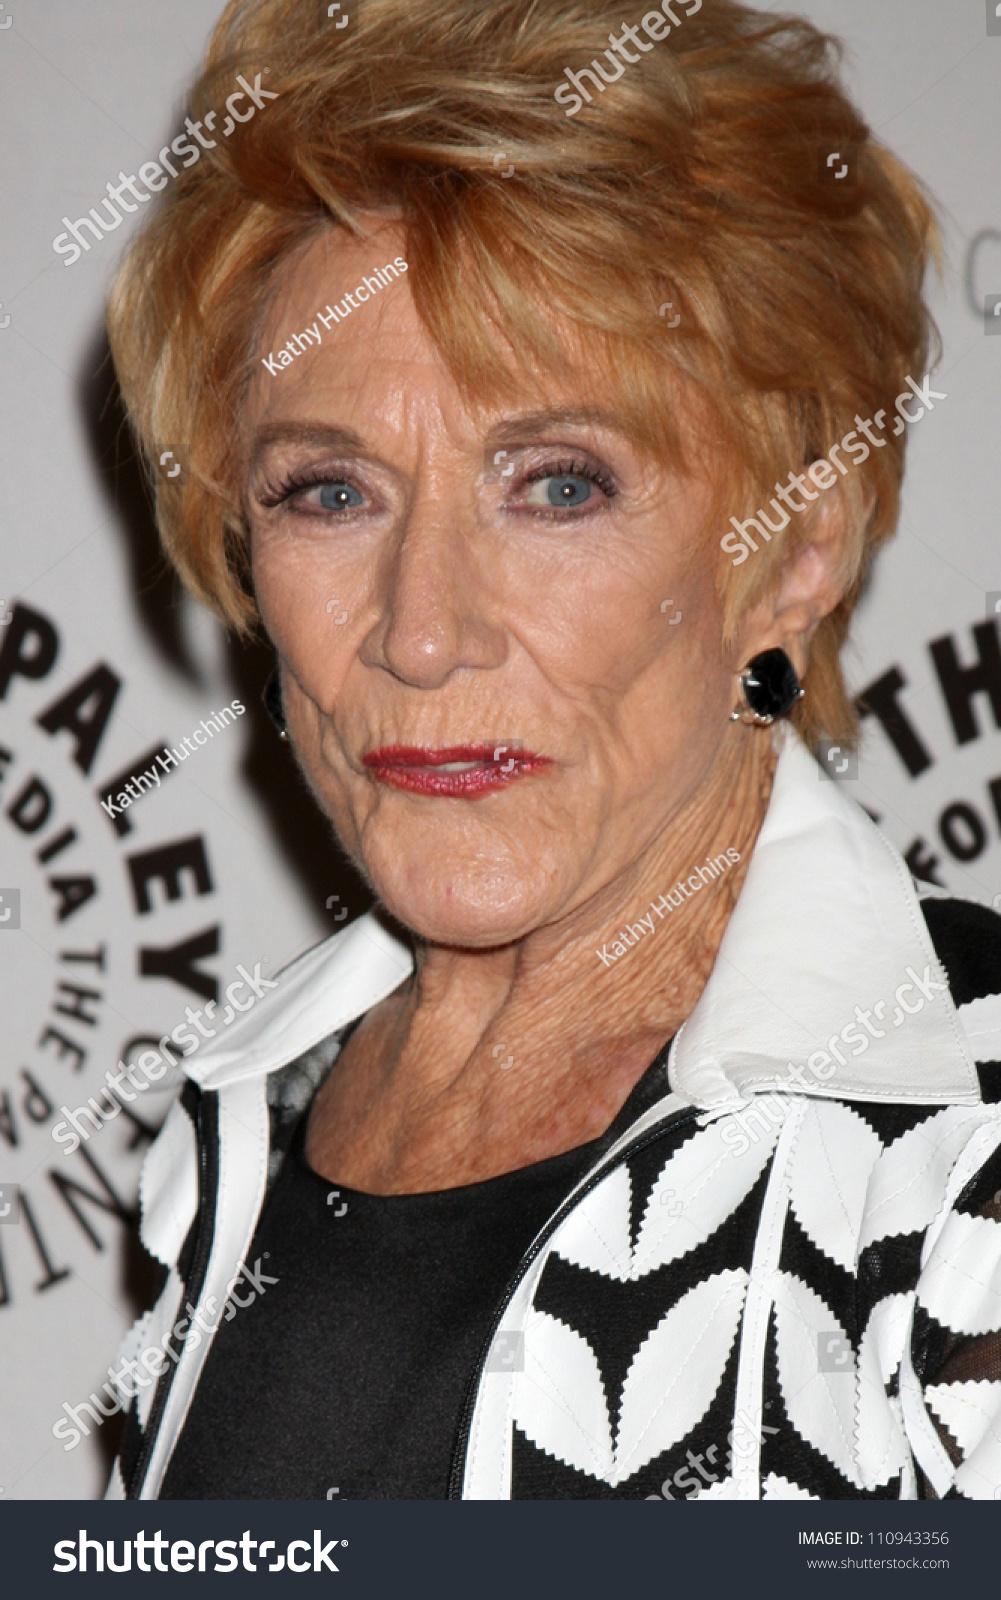 Jeanne cooper pictures